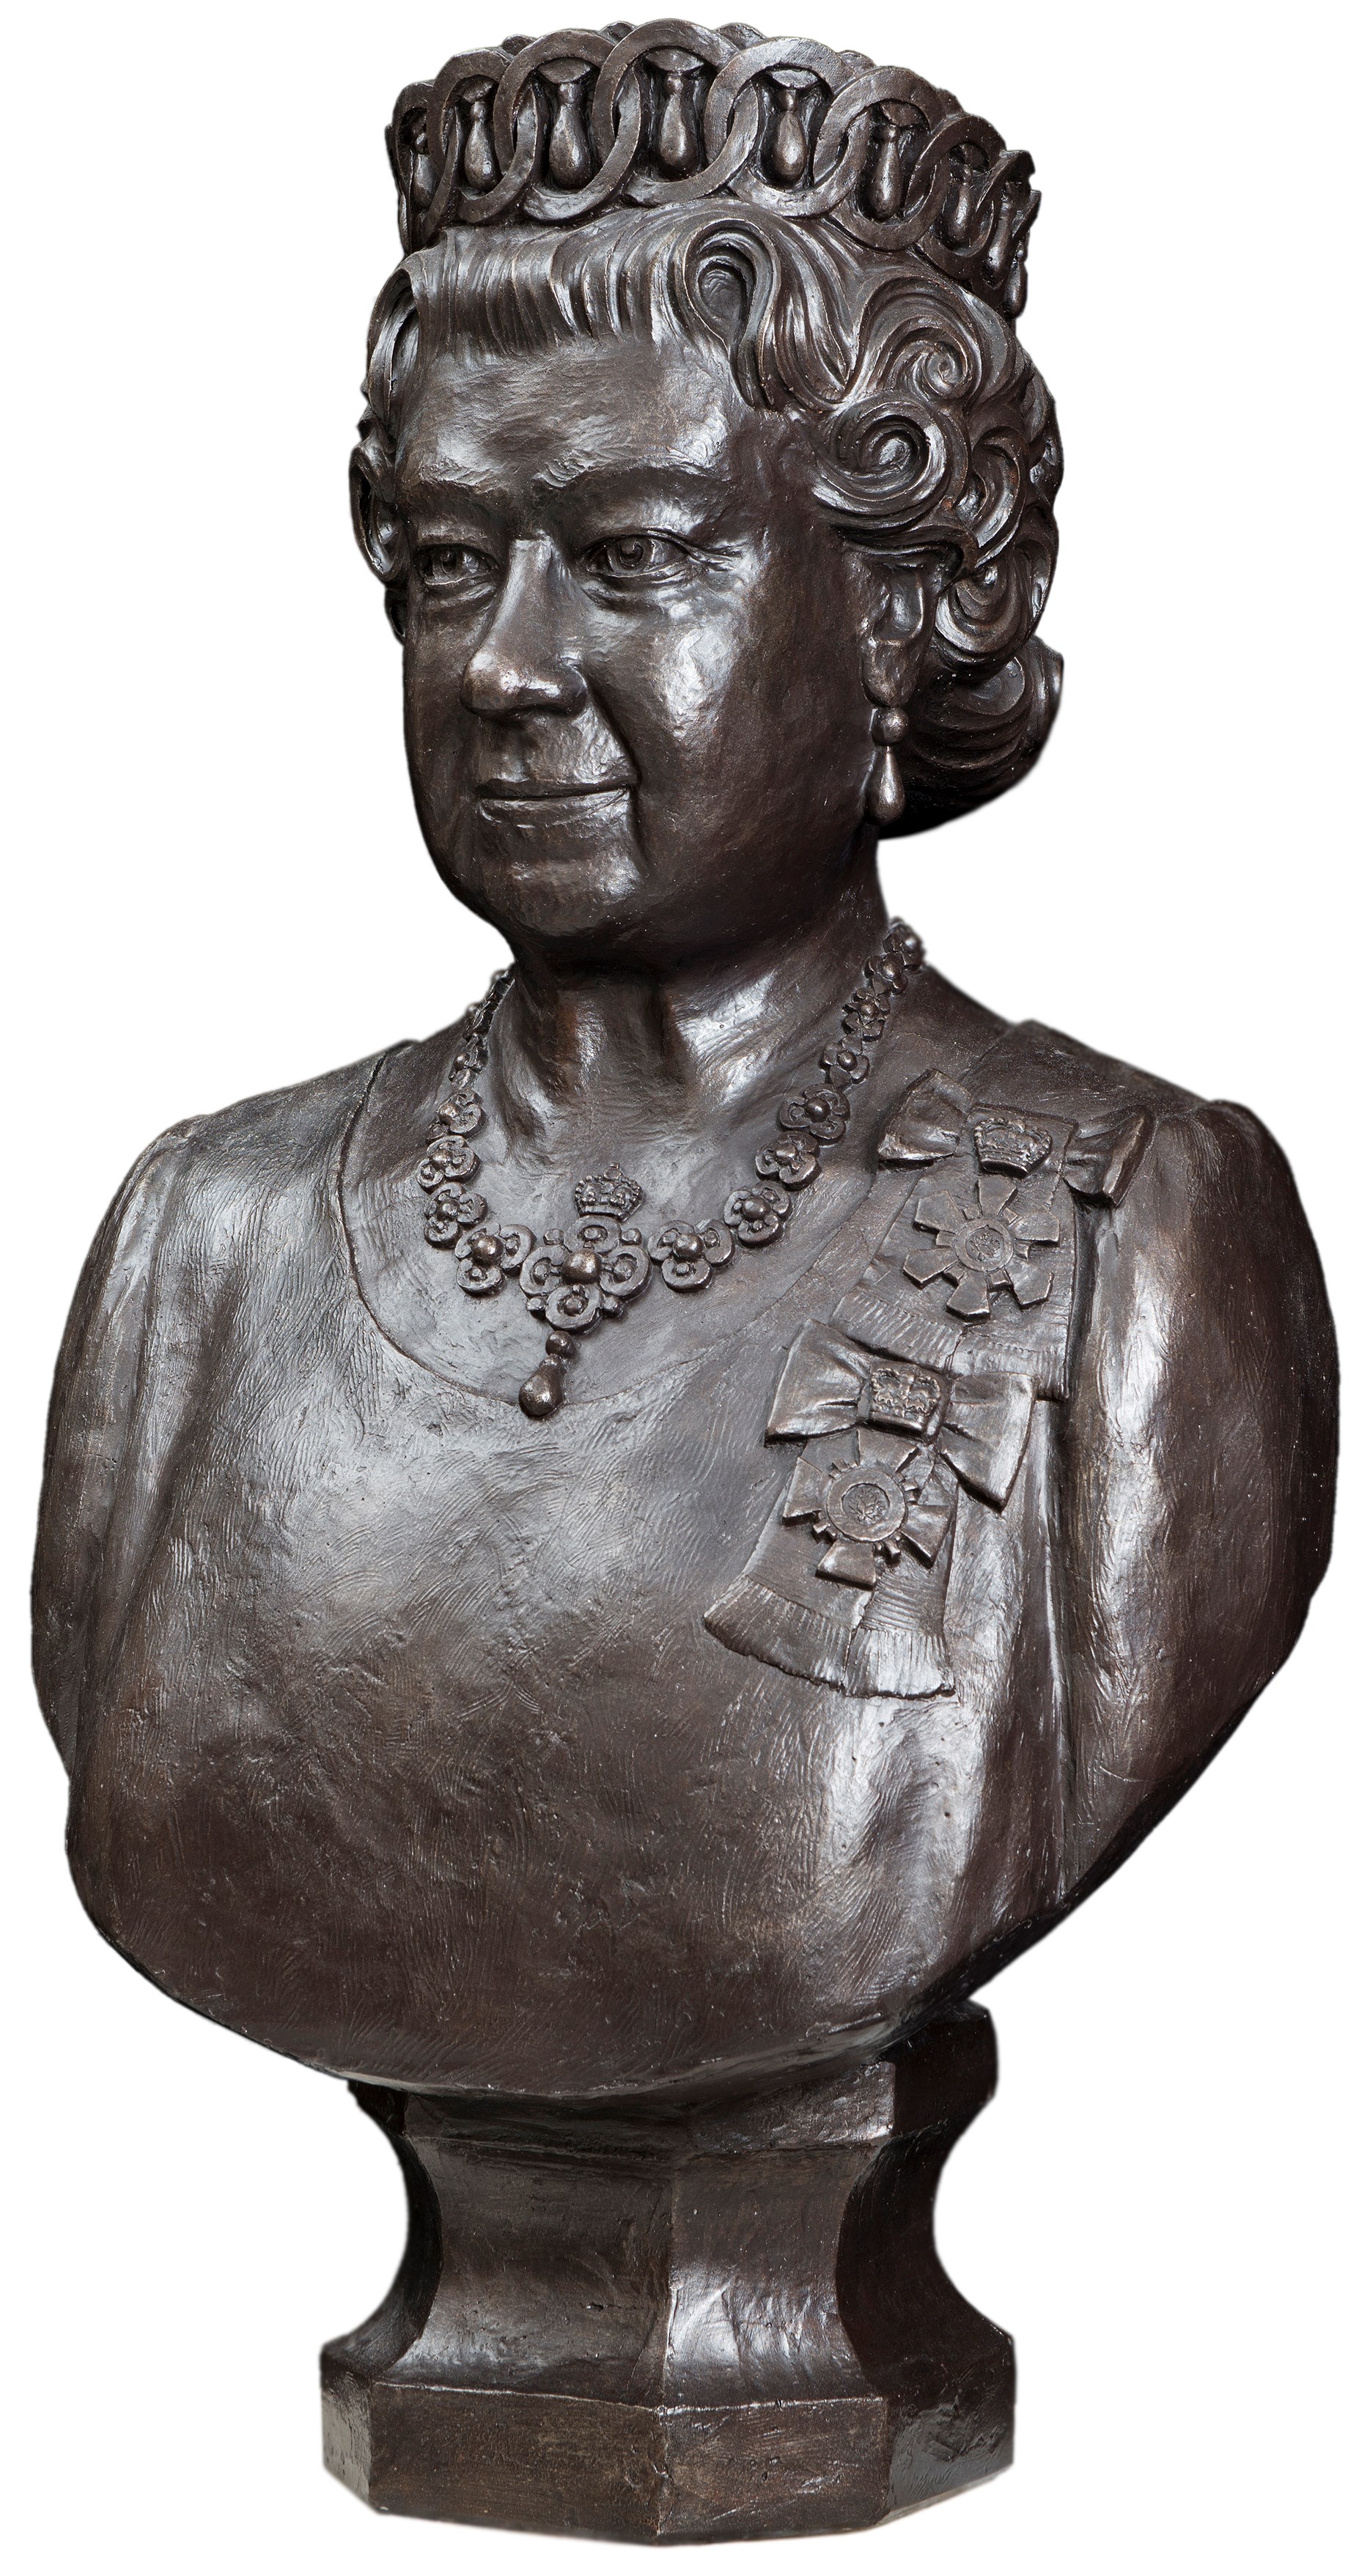 This bronze portrait bust of Queen Elizabeth II was created by Dominion Sculptor Phil White for the Queen’s Diamond Jubilee in 2012 and will soon move to the Senate of Canada Building.